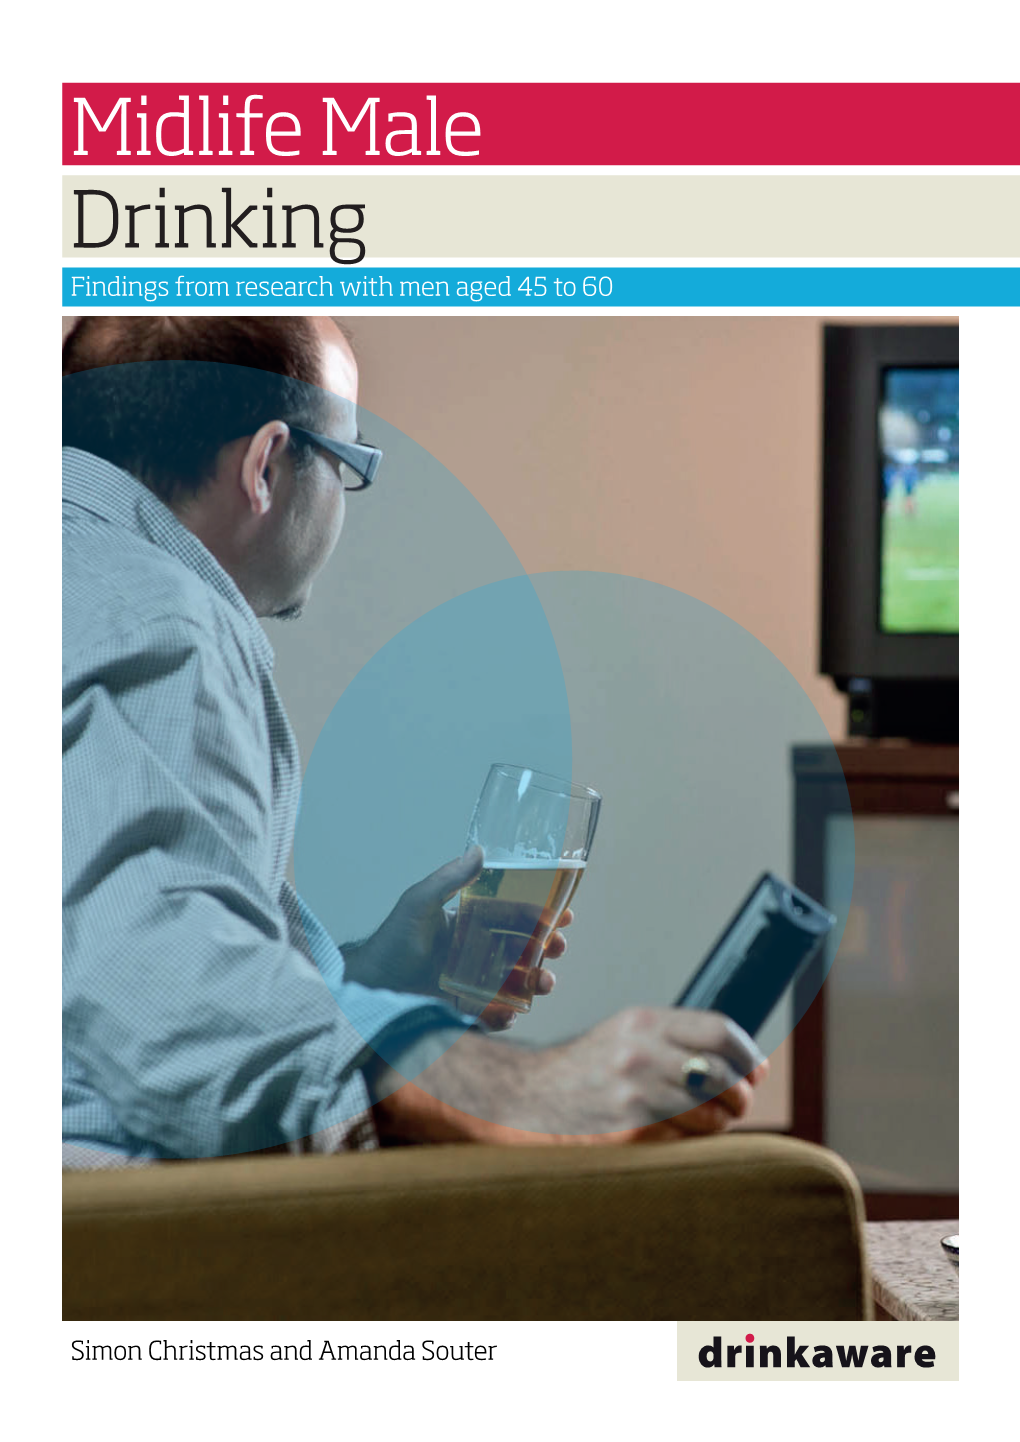 Midlife Male Drinking Findings from Research with Men Aged 45 to 60